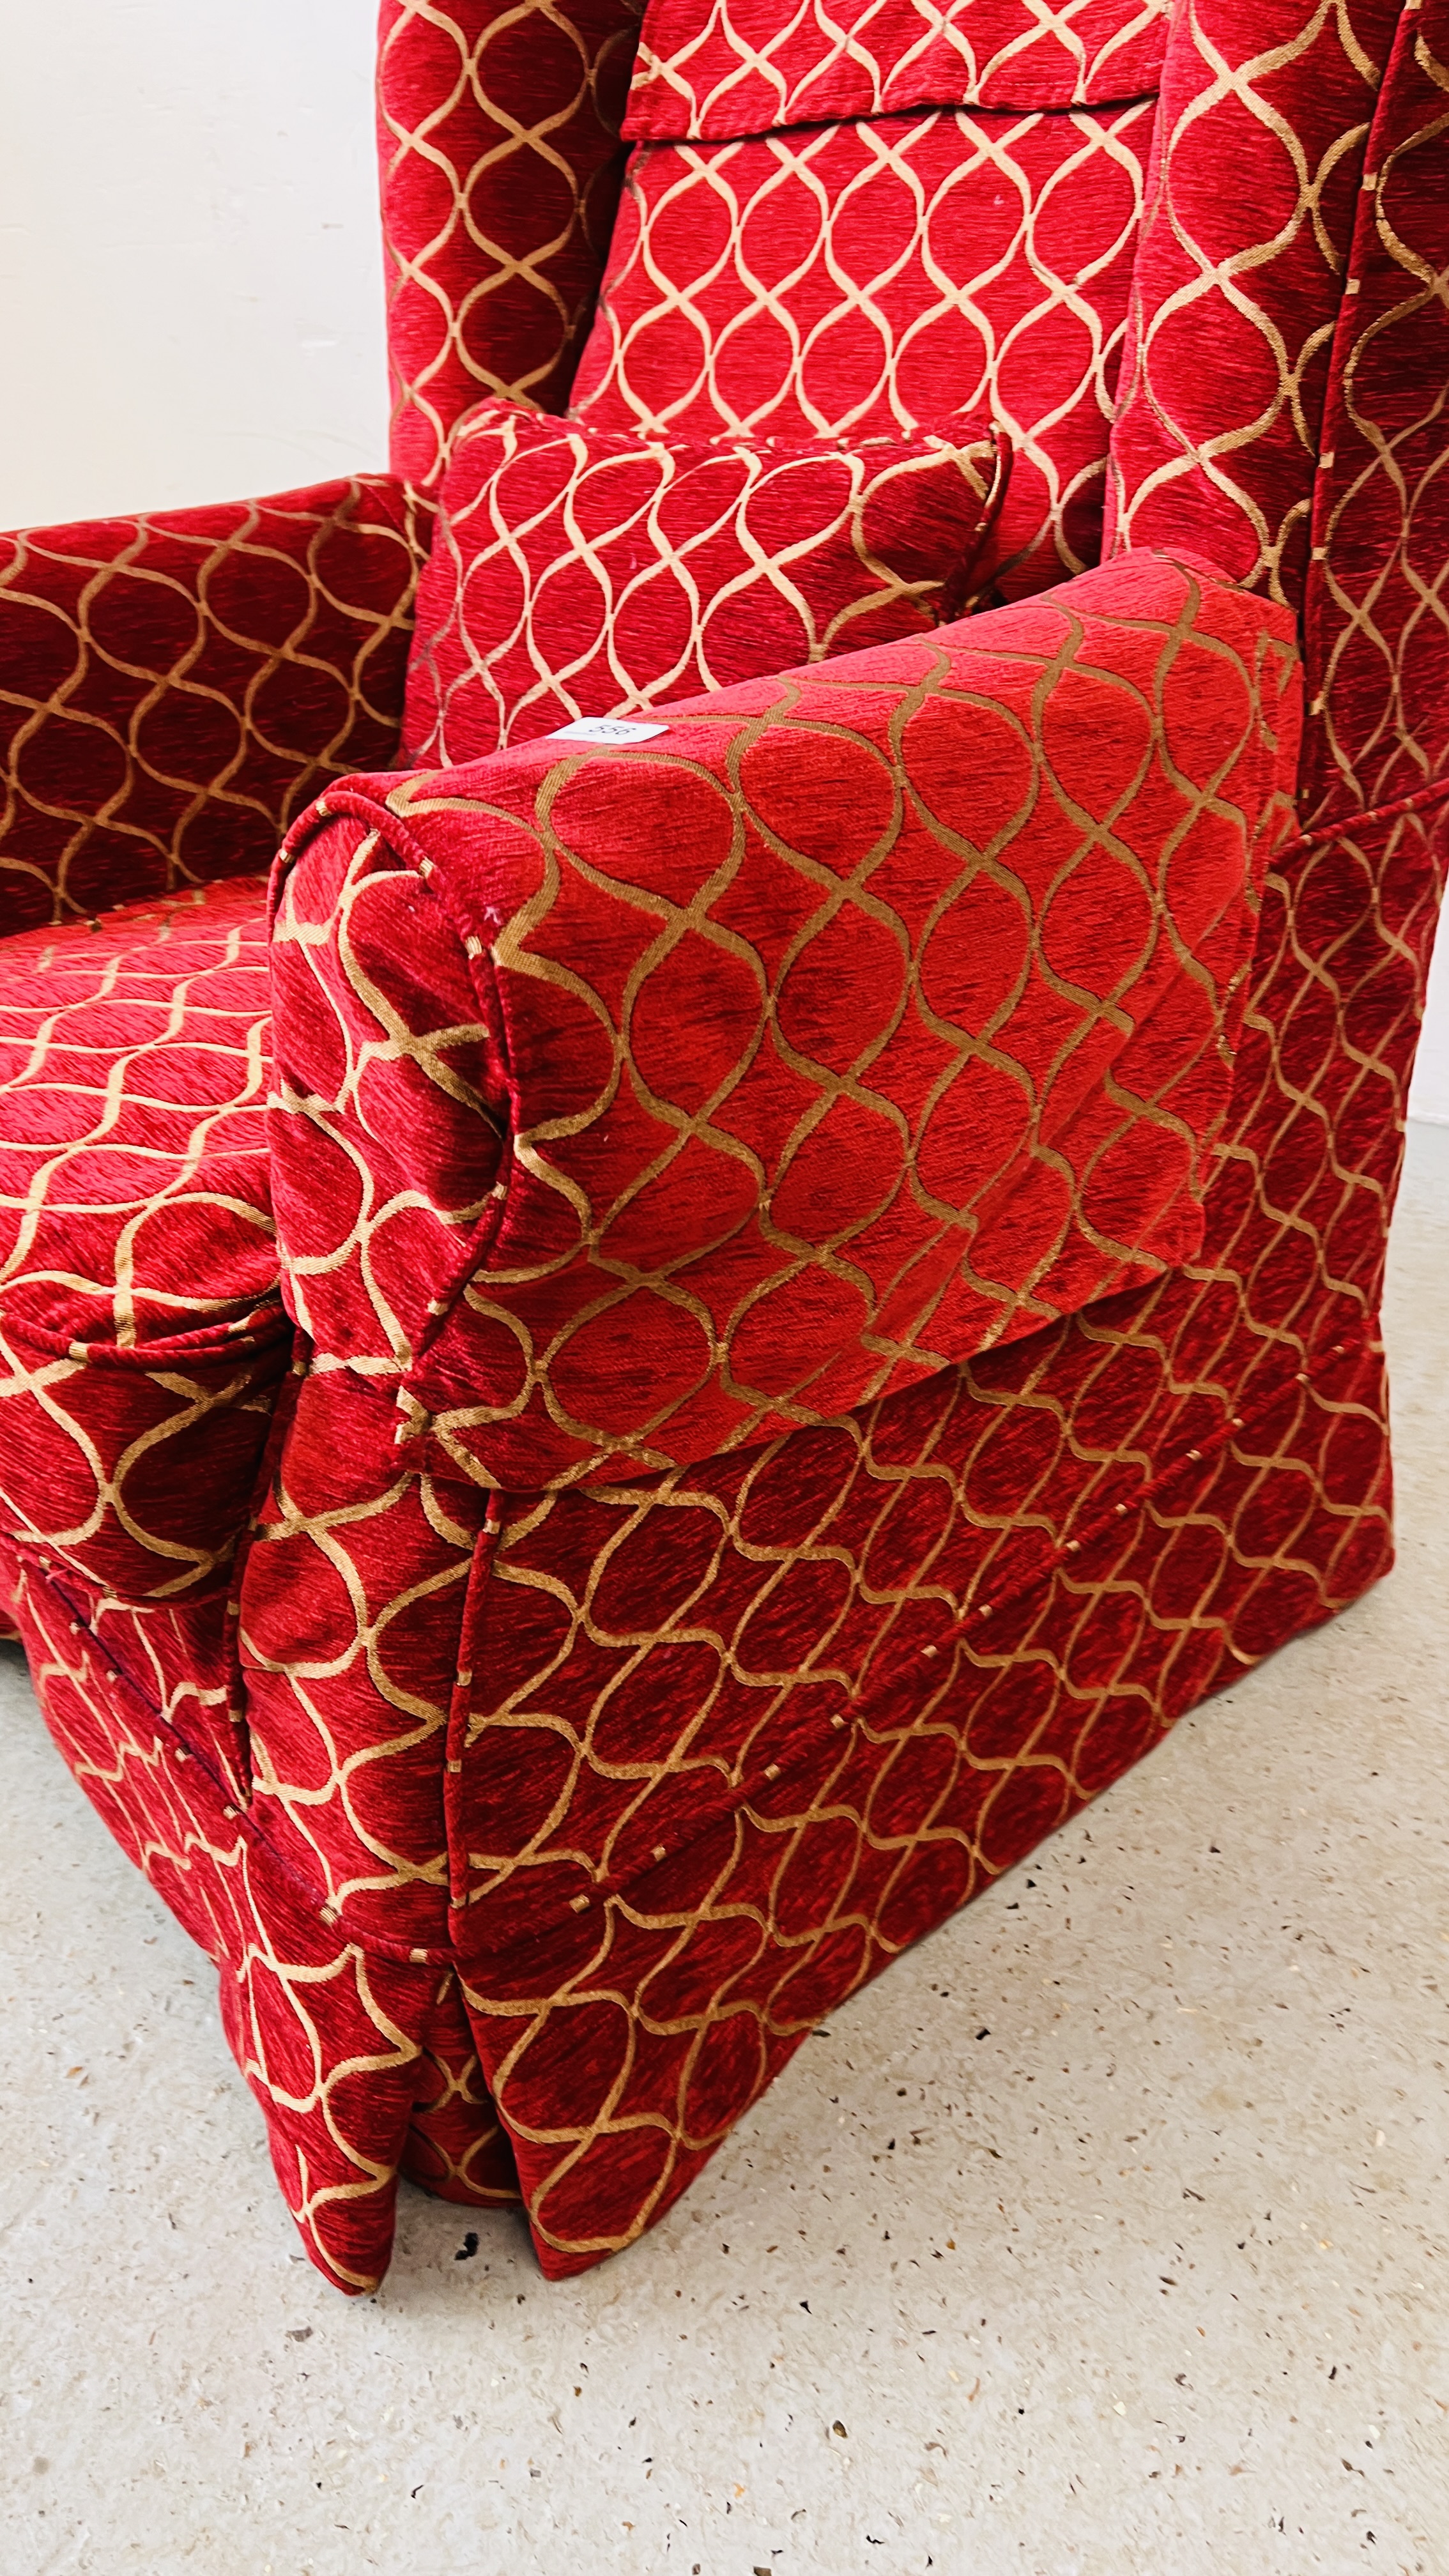 A MODERN WING BACK CHAIR UPHOLSTERED IN RED AND GOLD - Image 4 of 8